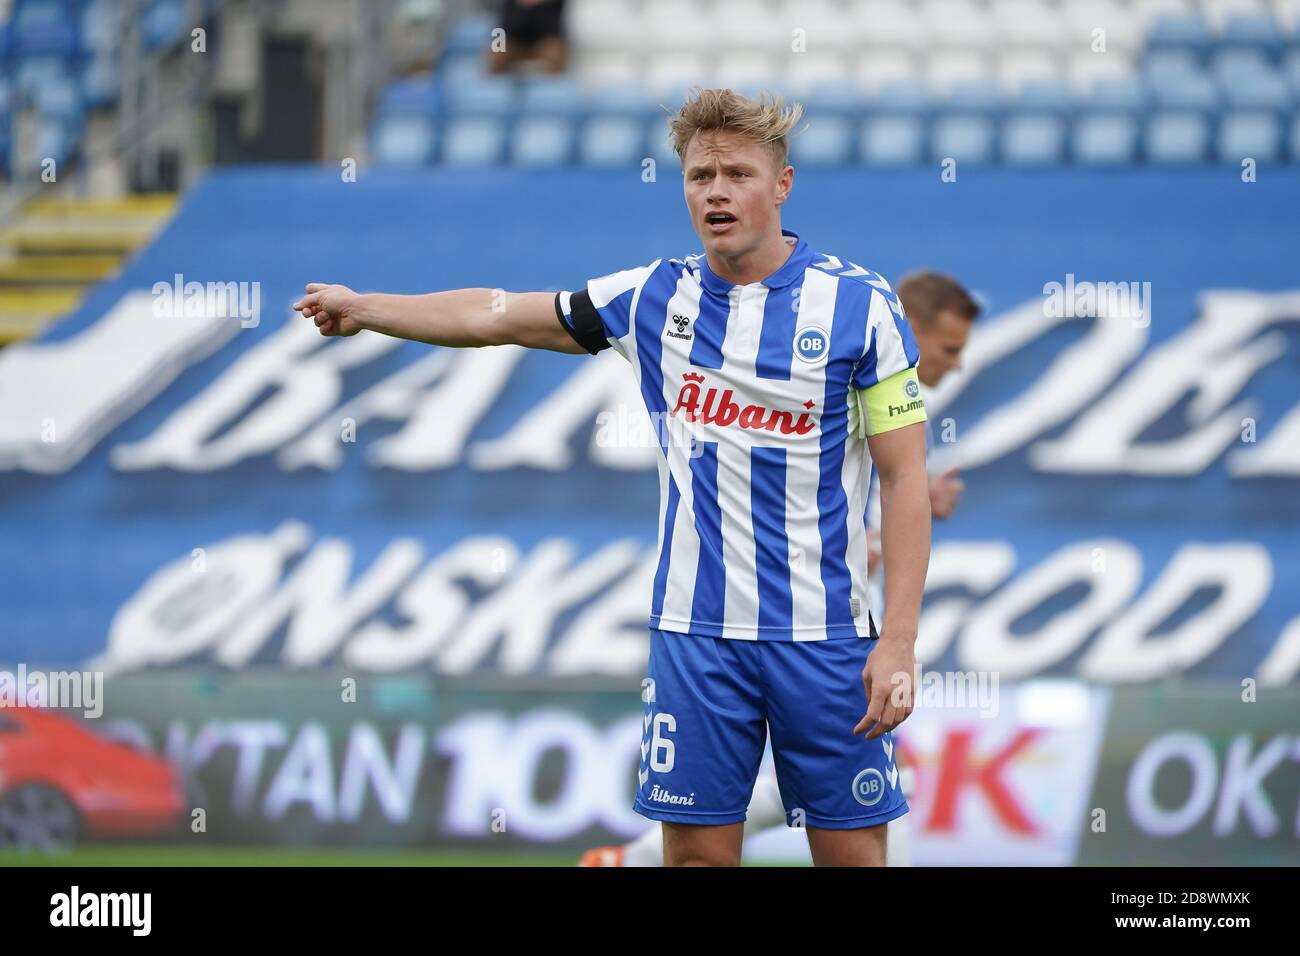 Odense, Denmark. 01st Nov, 2020. Jeppe Tverskov (6) of OB seen during the  3F Superliga match between Odense Boldklub and AC Horsens at Nature Energy  Park in Odense. (Photo Credit: Gonzales Photo/Alamy